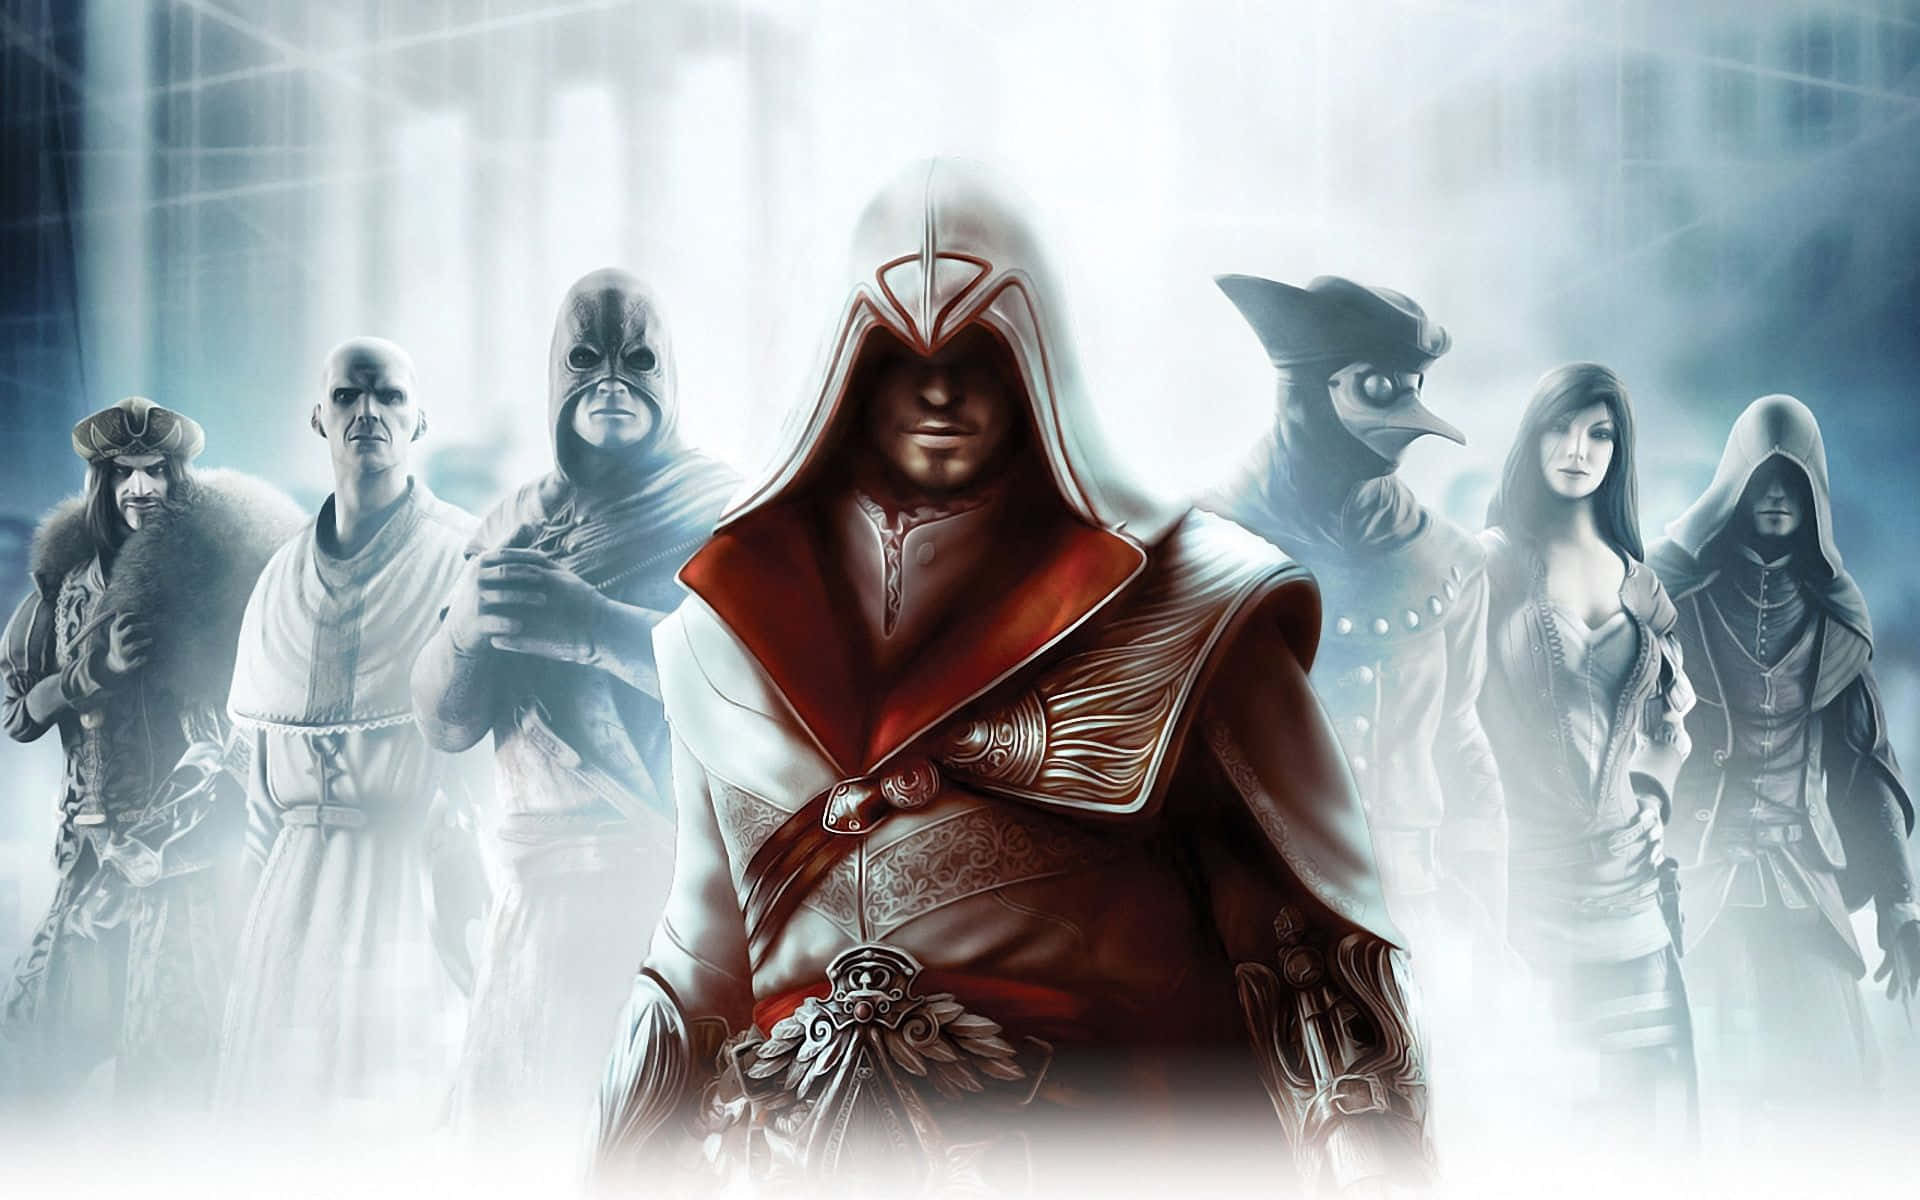 Thrilling Action in Assassin's Creed Brotherhood Wallpaper